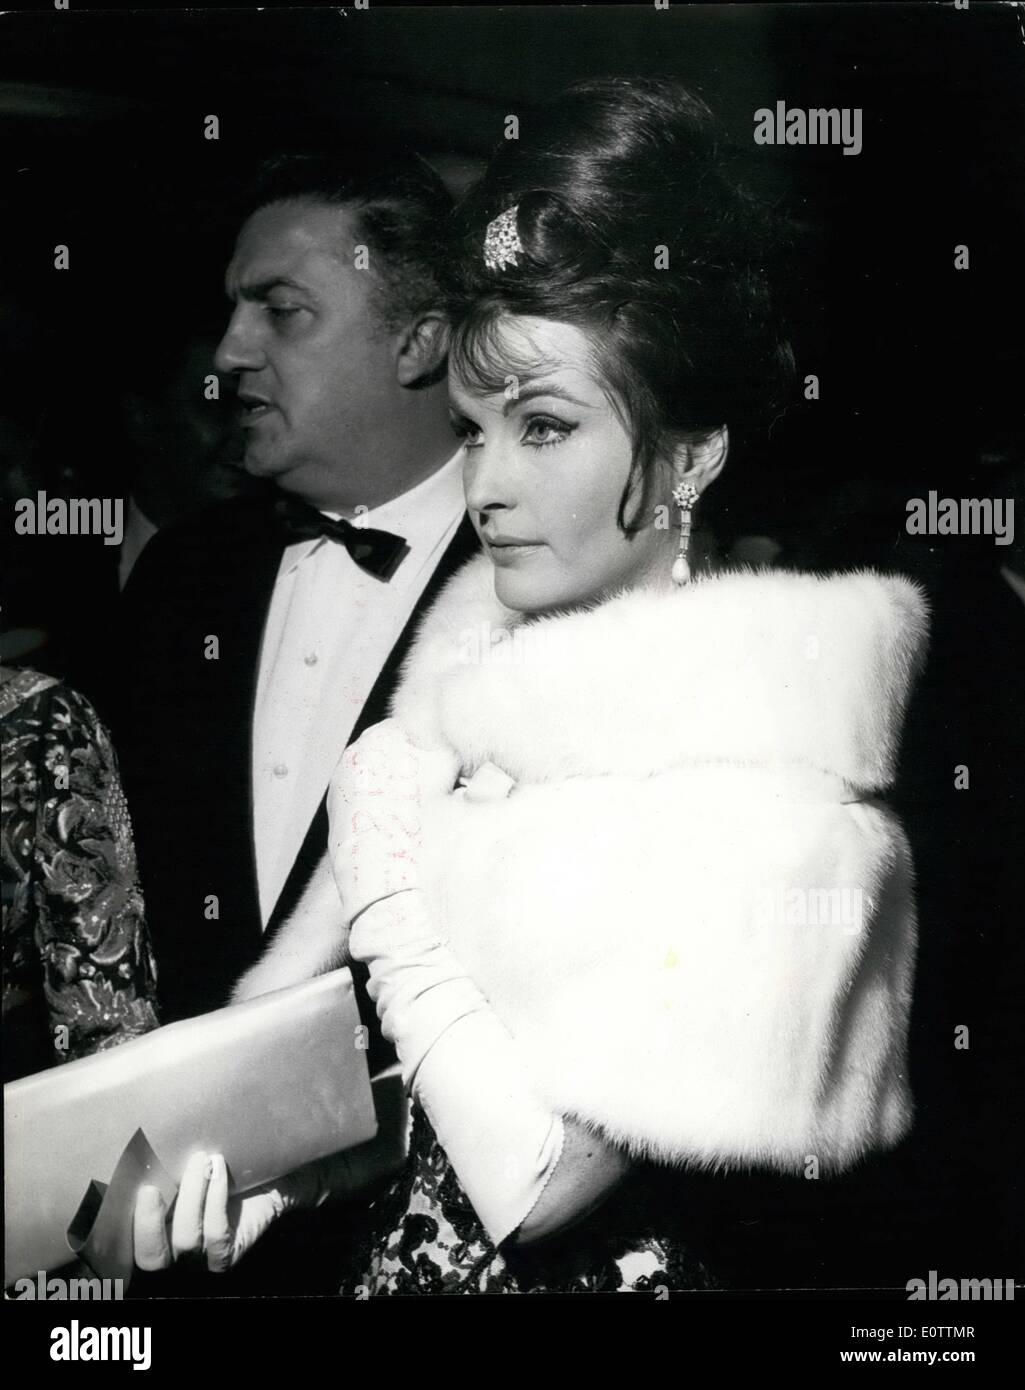 Sep. 09, 1960 - Premiere of ''La Dolce Vita'' - in London Photo shows British film star Yvonne Furneaux wears a Mink stole - when arriving at the Columbia Theater, last night for the premiere of ''La Dolce Vita'' - the new Italian film in which she stars. Stock Photo